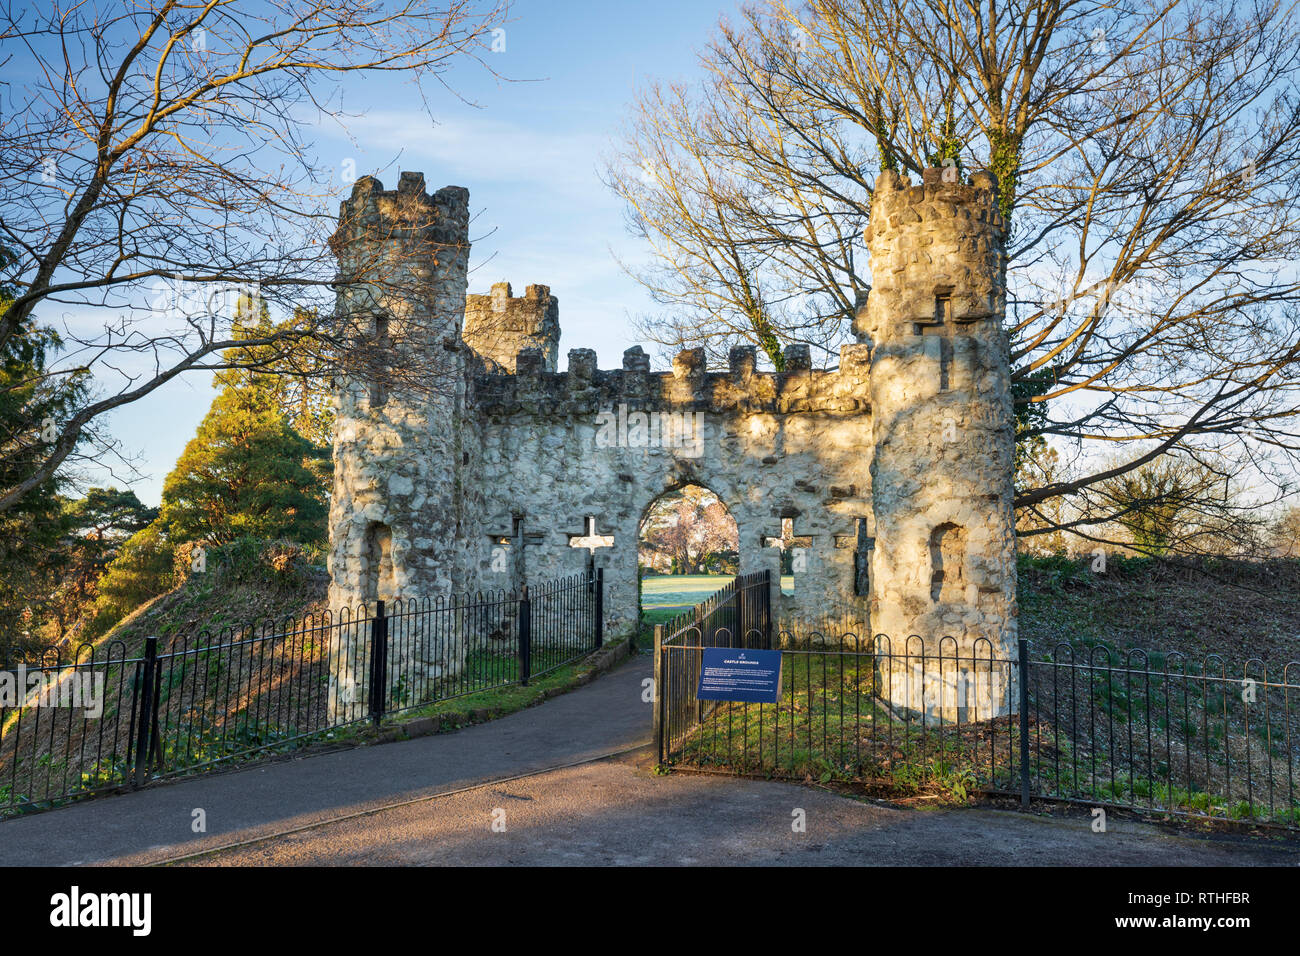 Ruins of Reigate castle gatehouse in the Castle Grounds Park Stock Photo